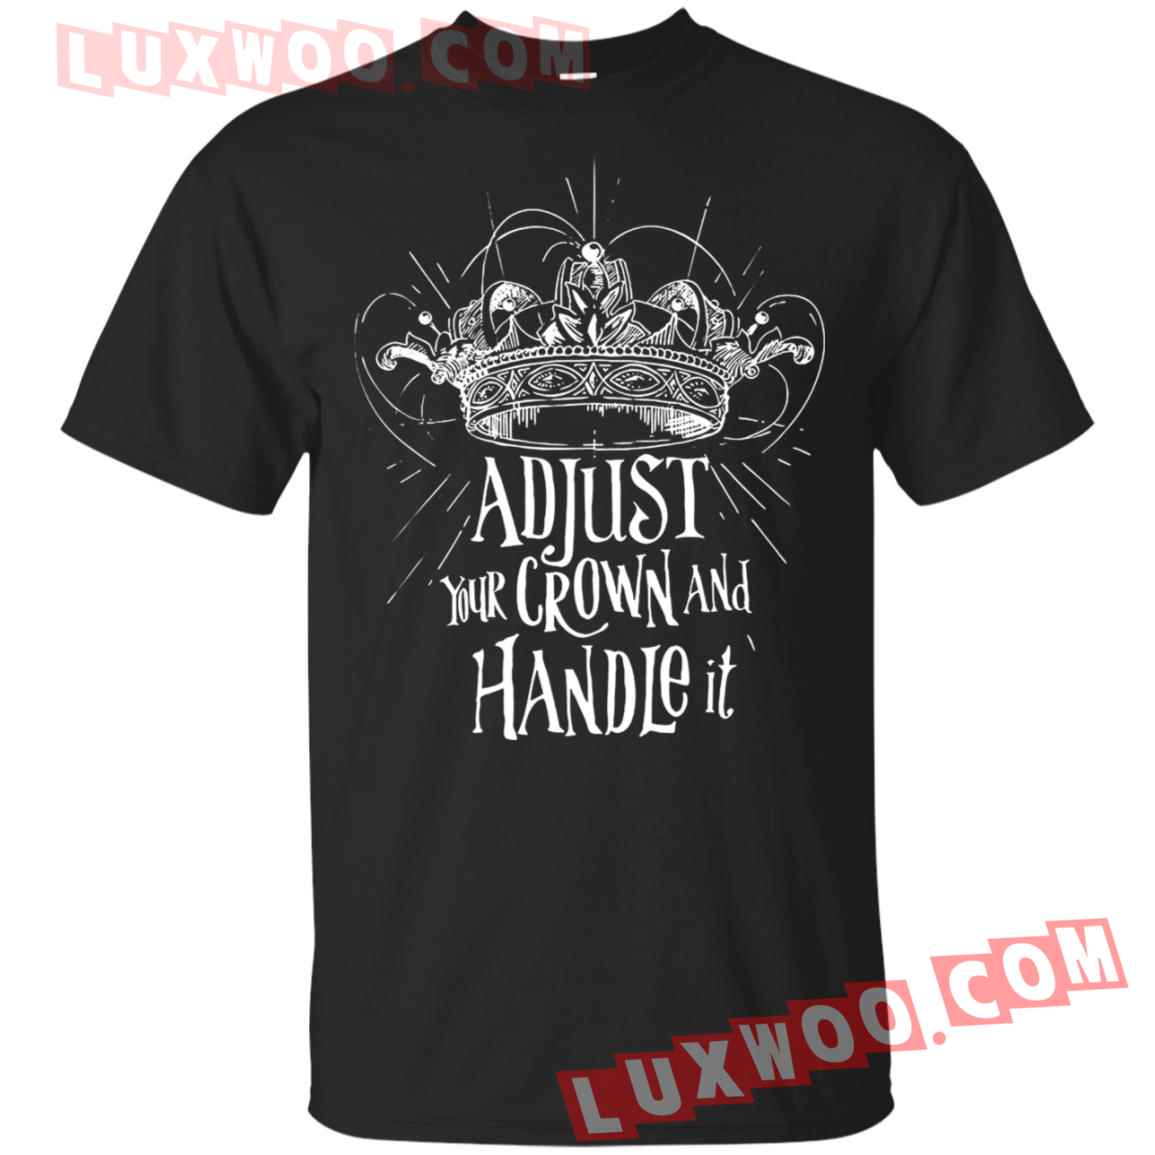 Adjust Your Crown And Handle It Shirt - Luxwoo.com